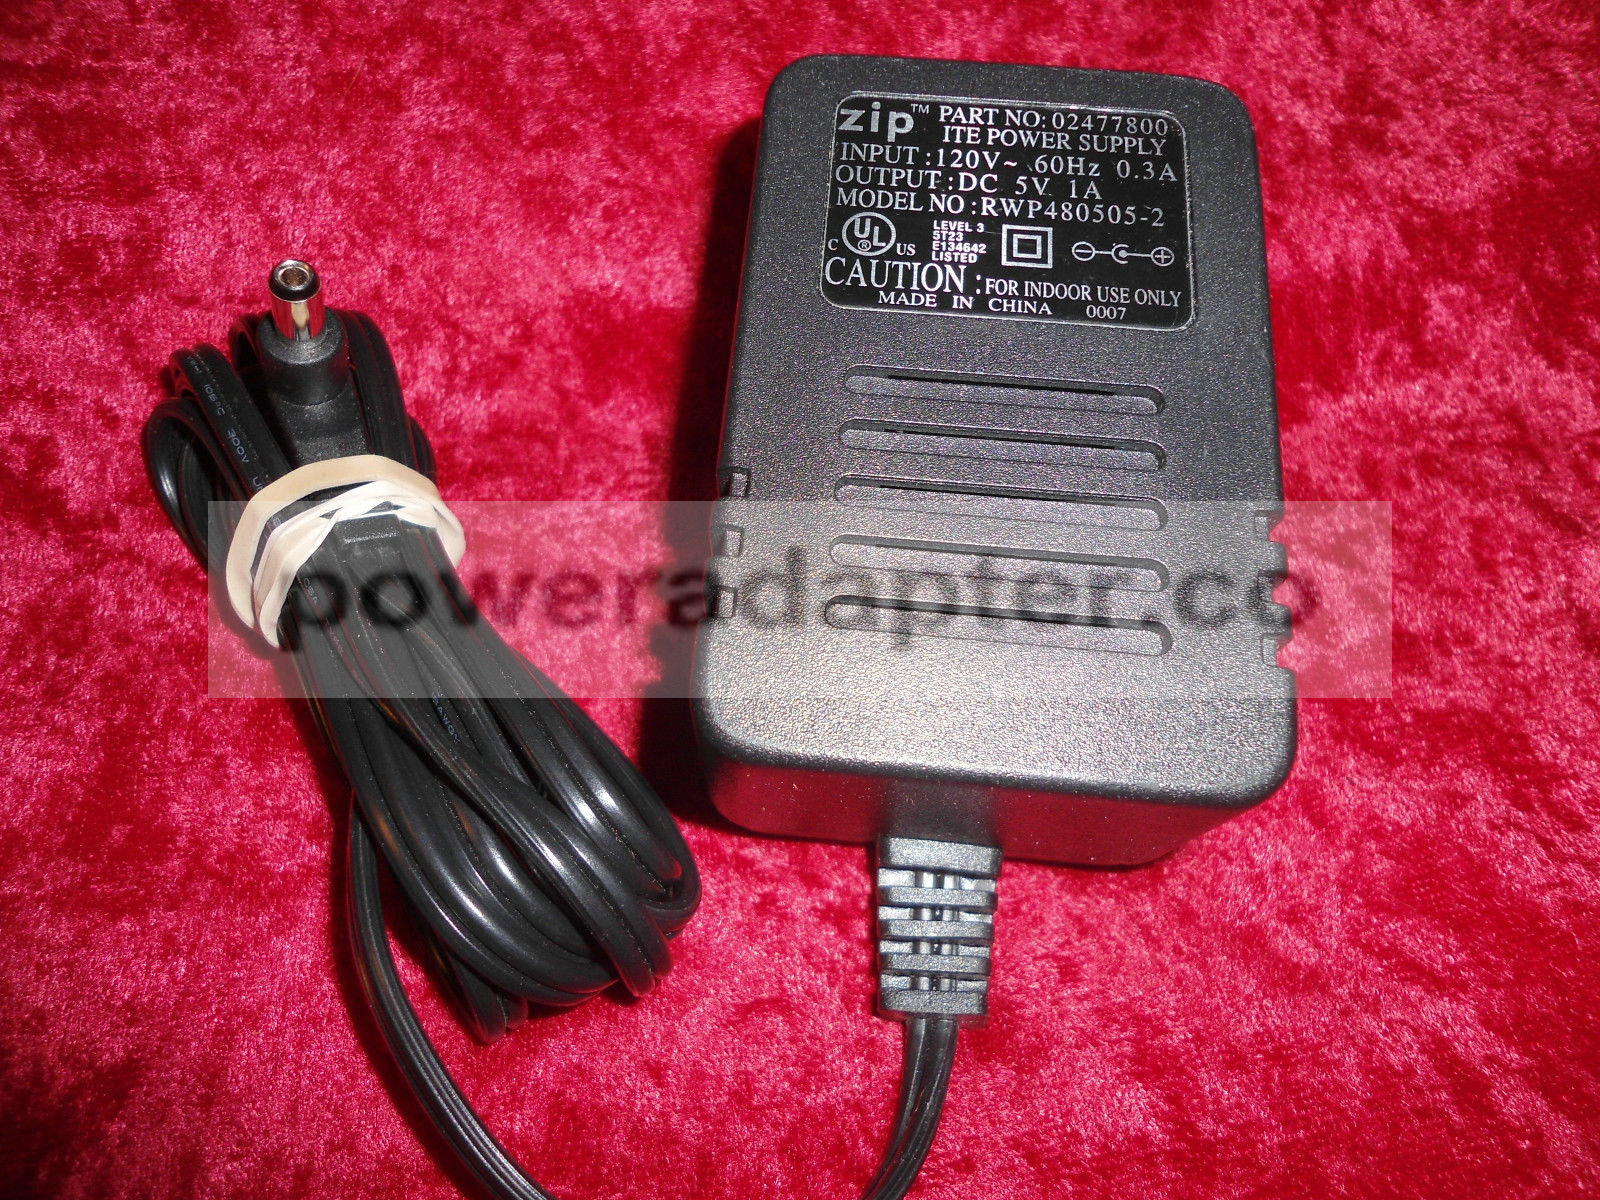 ZIP RWP480505-2 ITE AC ADAPTER CORD MODEL PN 02477800 5 VOLT/1 AMP Output Voltage: 5 V Model: RWP480505-2 Country o